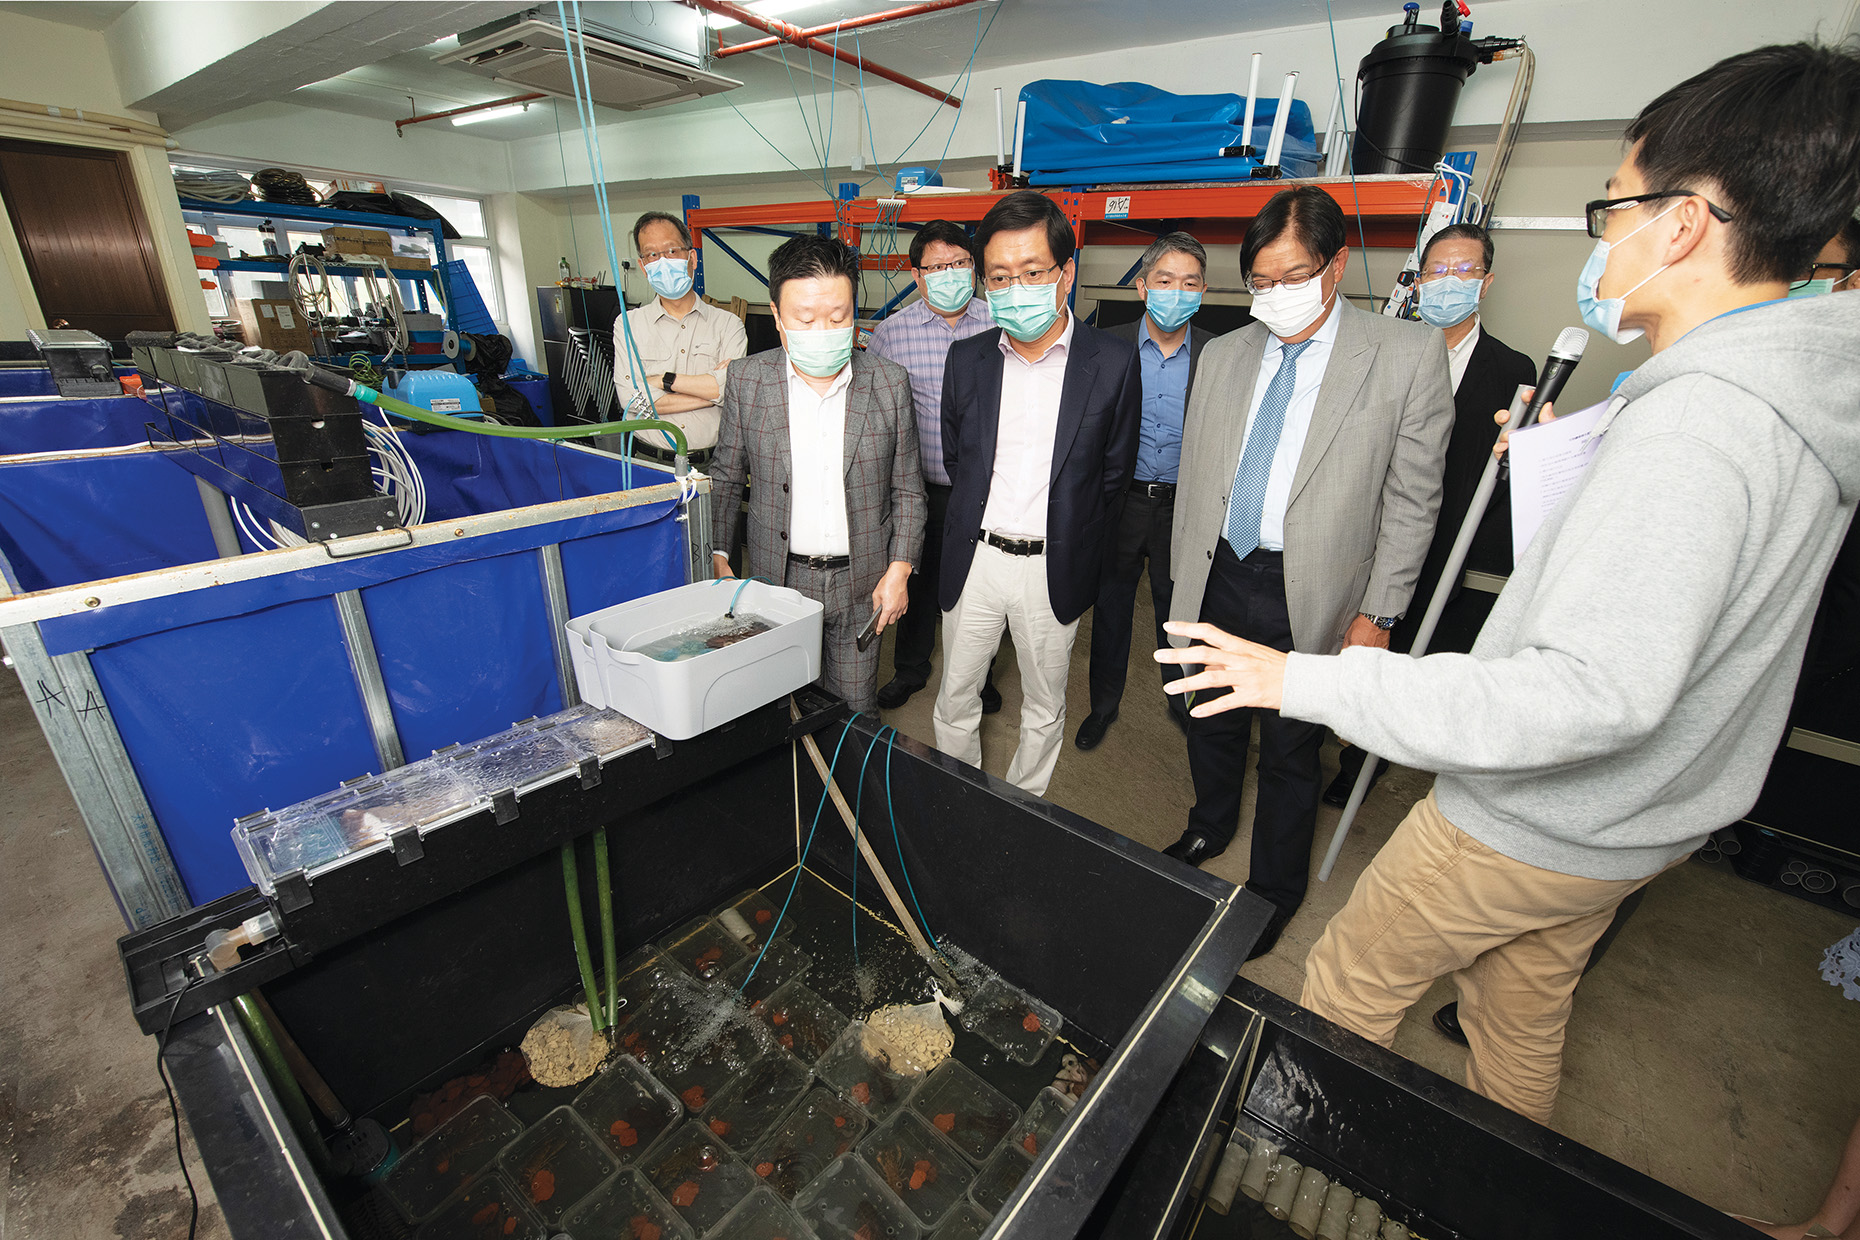 In May 2020, AAHK CEO Fred Lam (fourth from left), concurrently the Chairperson of the Steering Committee (SC) of the MEEF and the FEF, inspects the redclaw crayfish farming technology with members of the SC and directors of the Marine Ecology & Fisheries Enhancement Funds Trustee Limited.